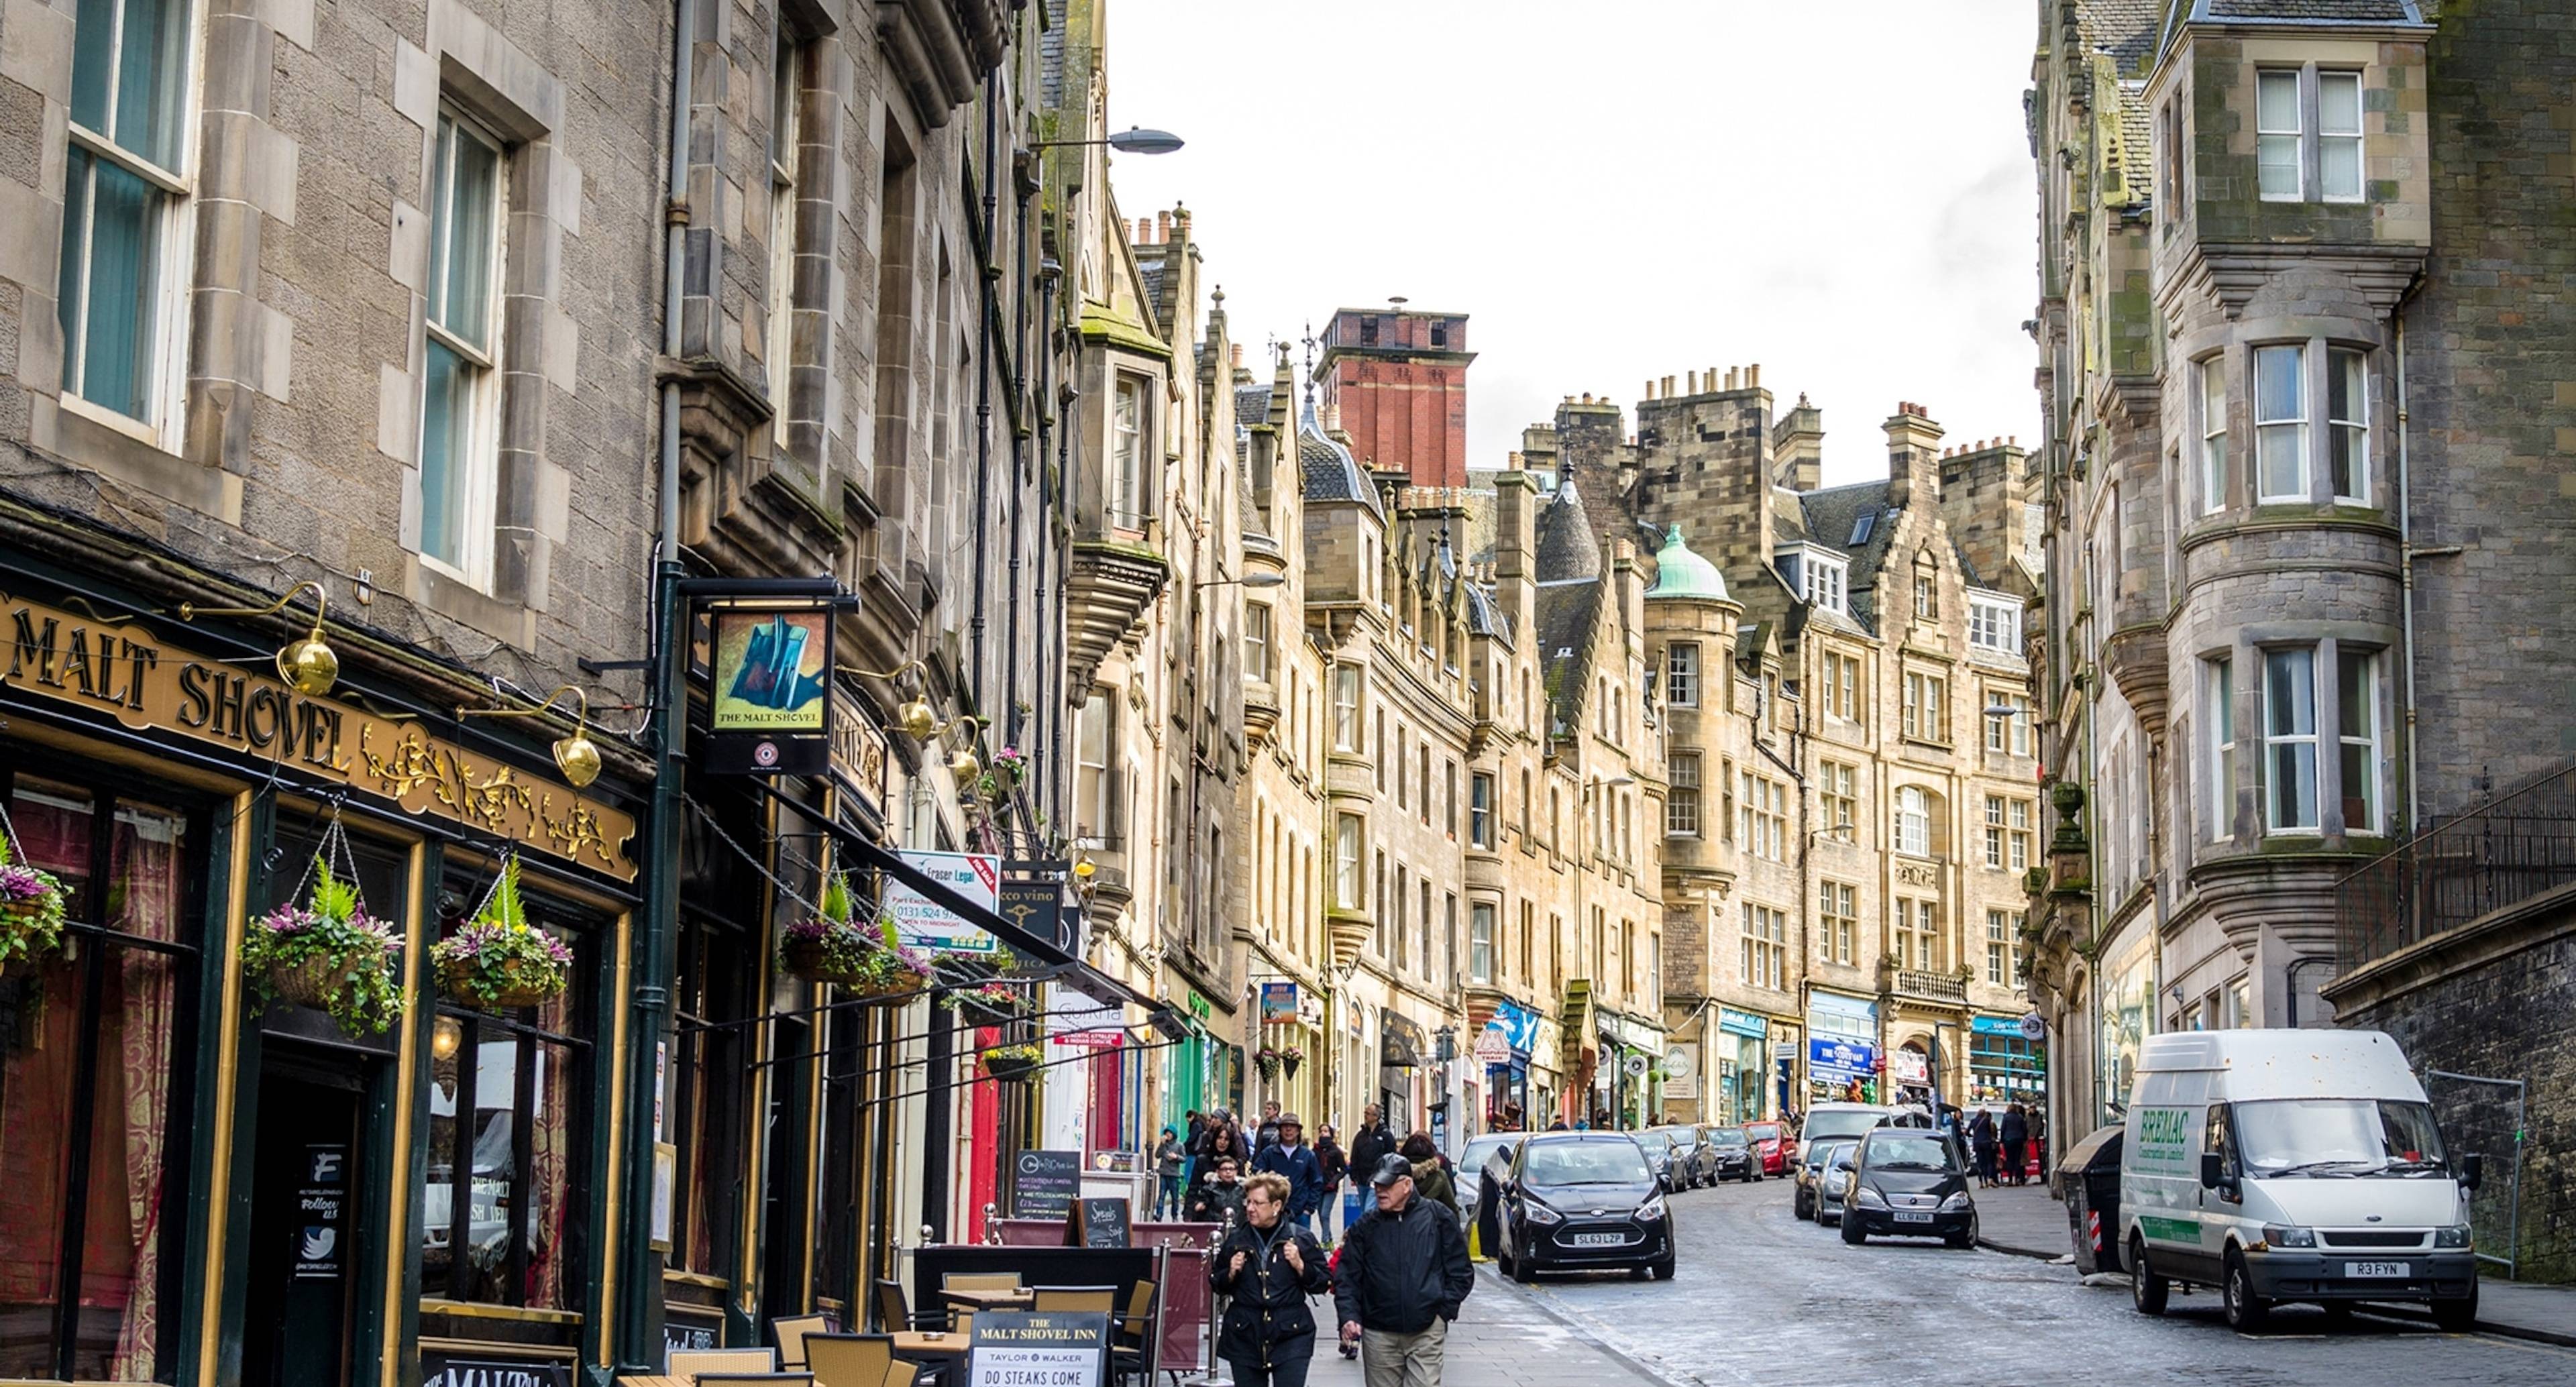 Where to eat and drink in Scotland's capital?